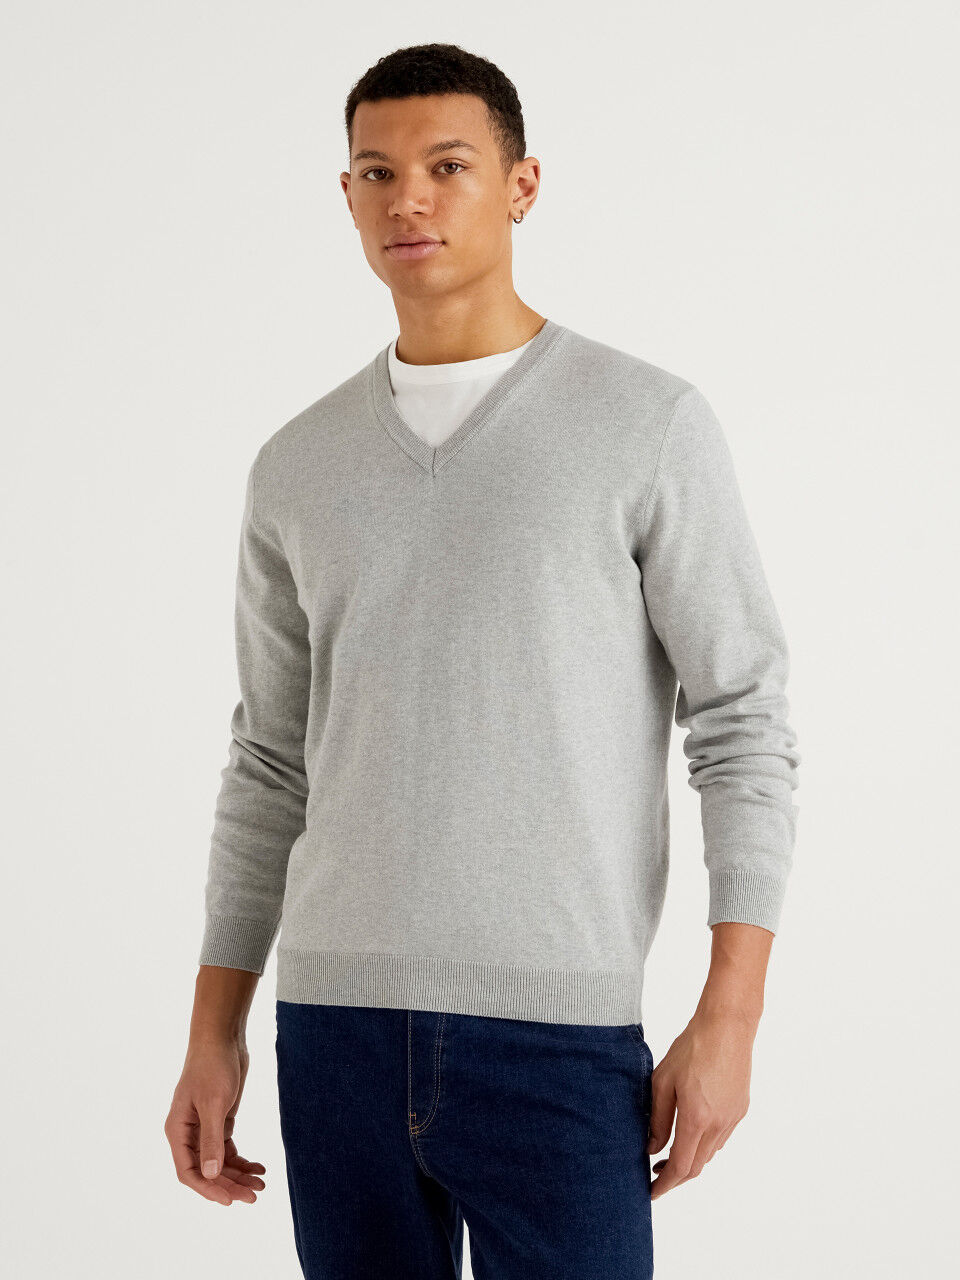 Men's V-Neck Sweaters New Collection 2021 |